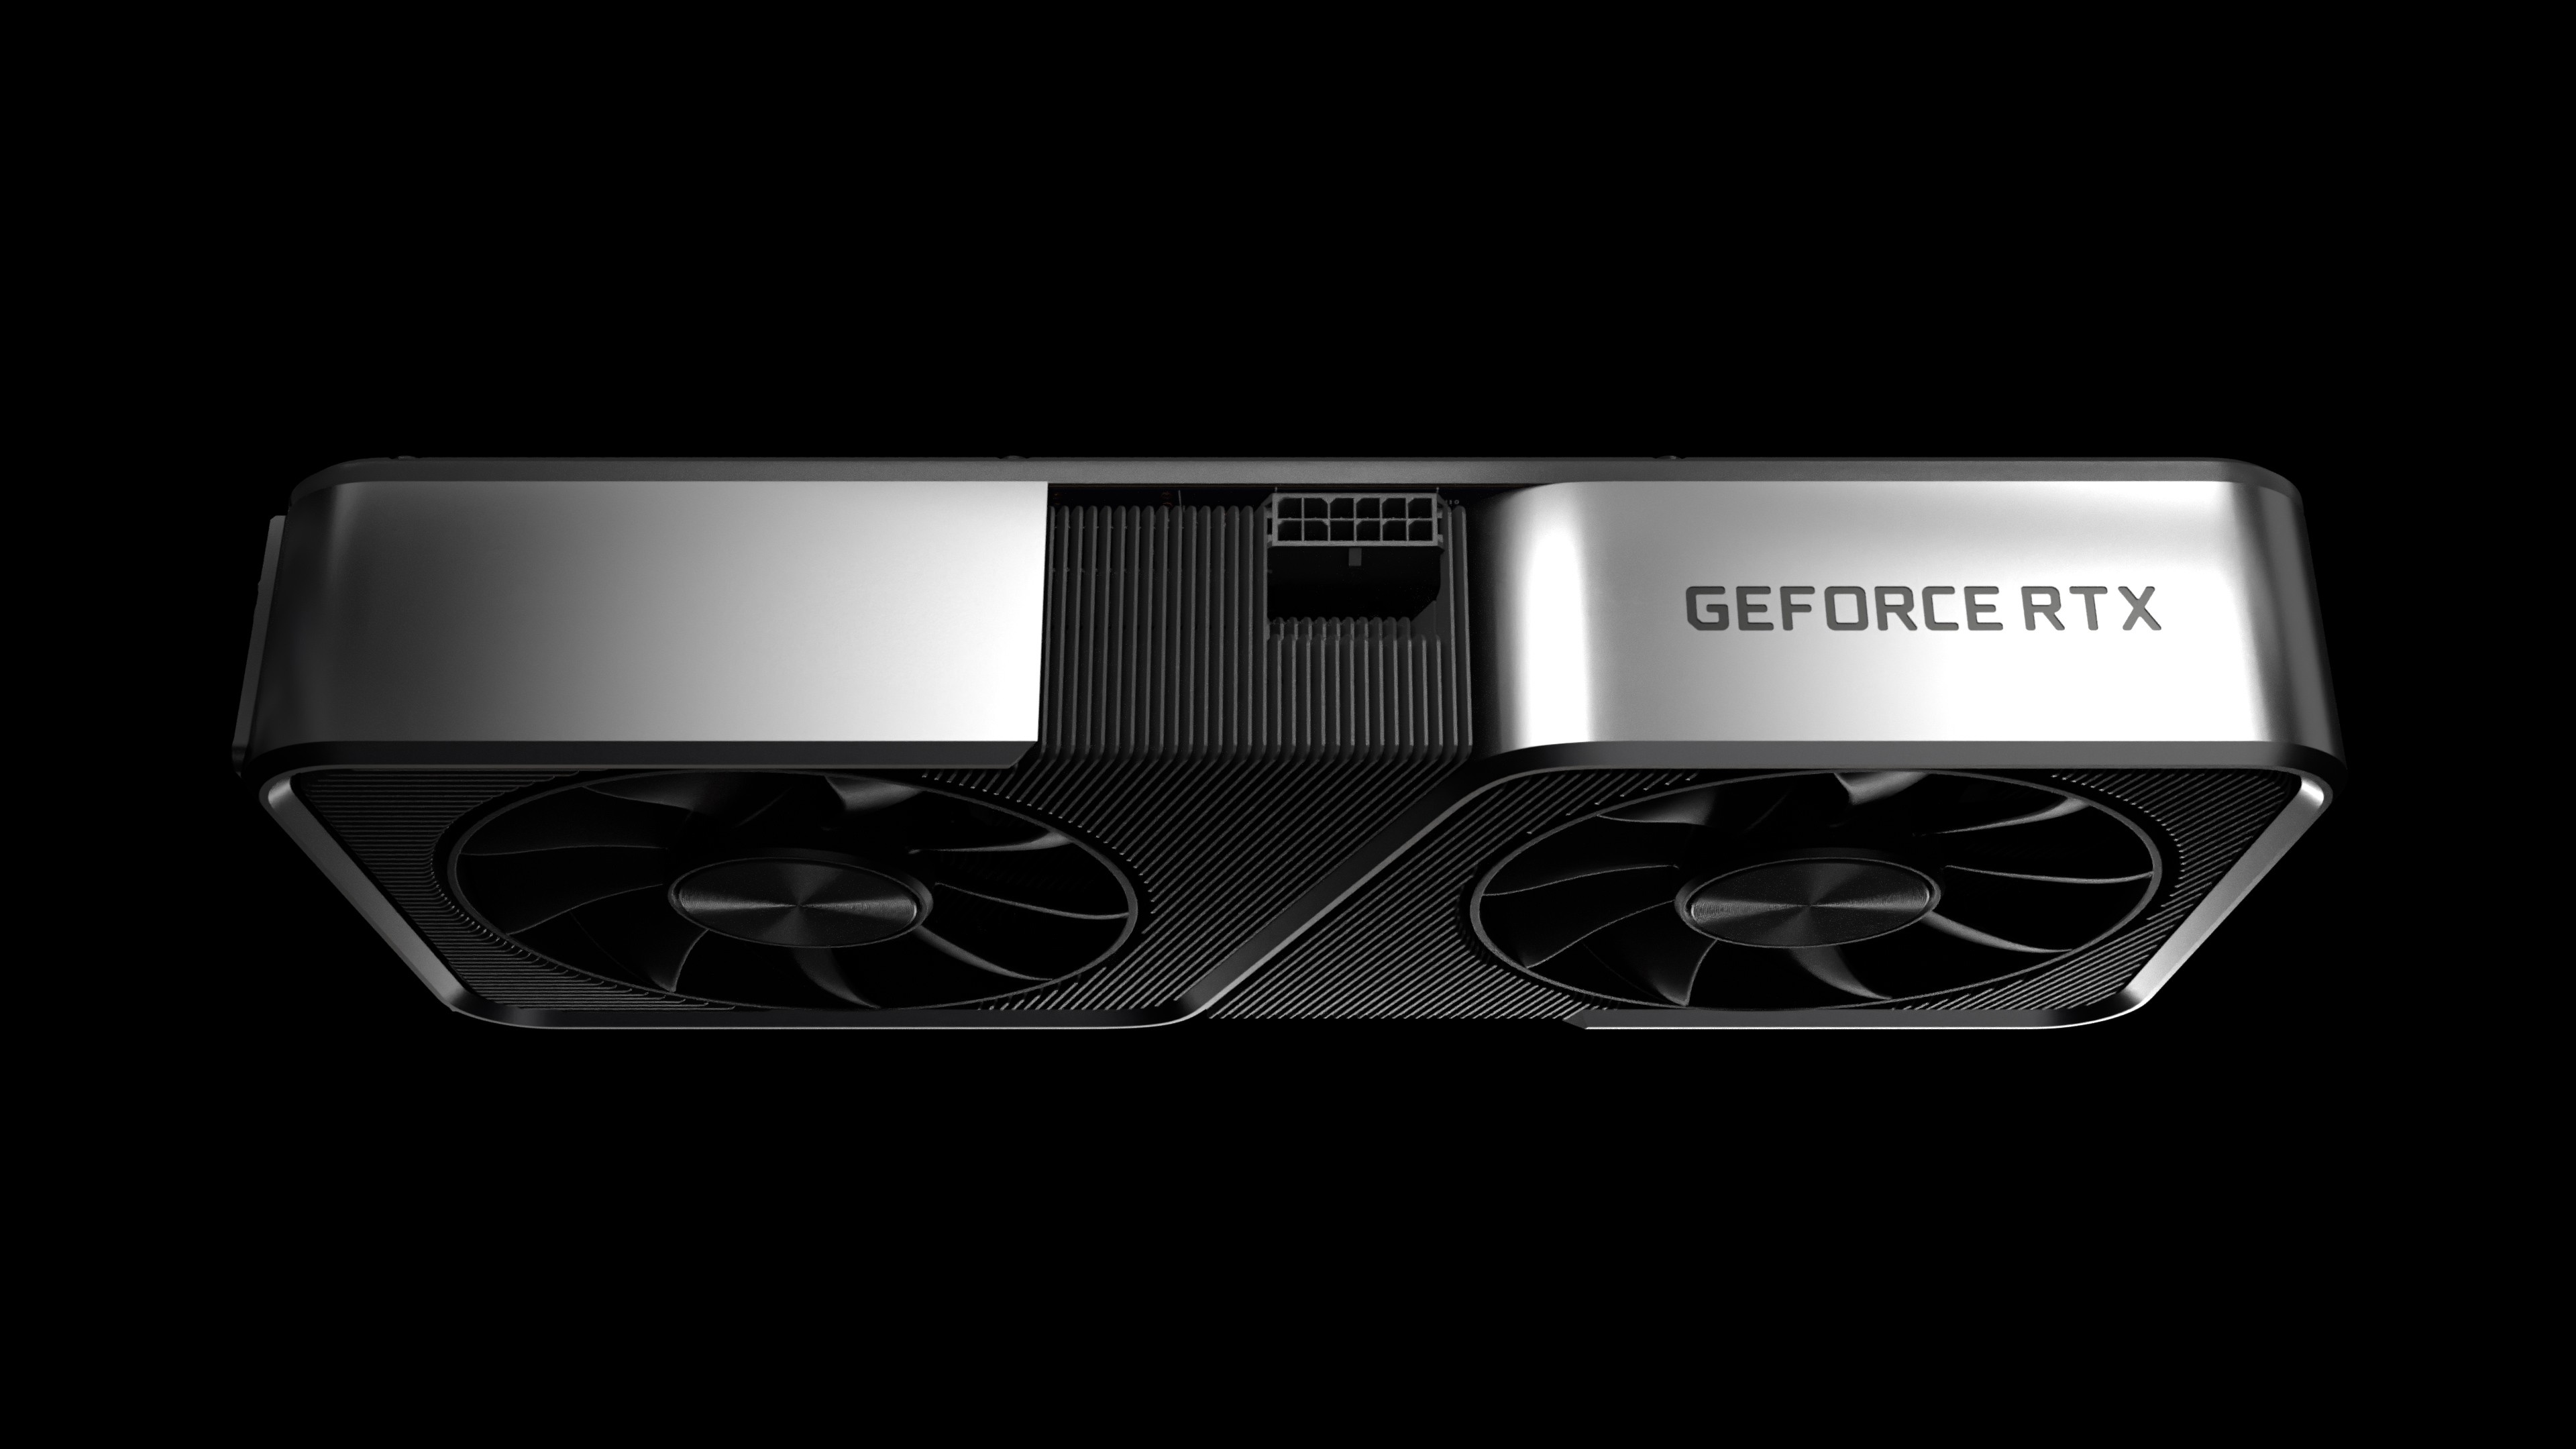 General 3840x2160 Nvidia computer PC gaming GPUs technology hardware simple background closeup